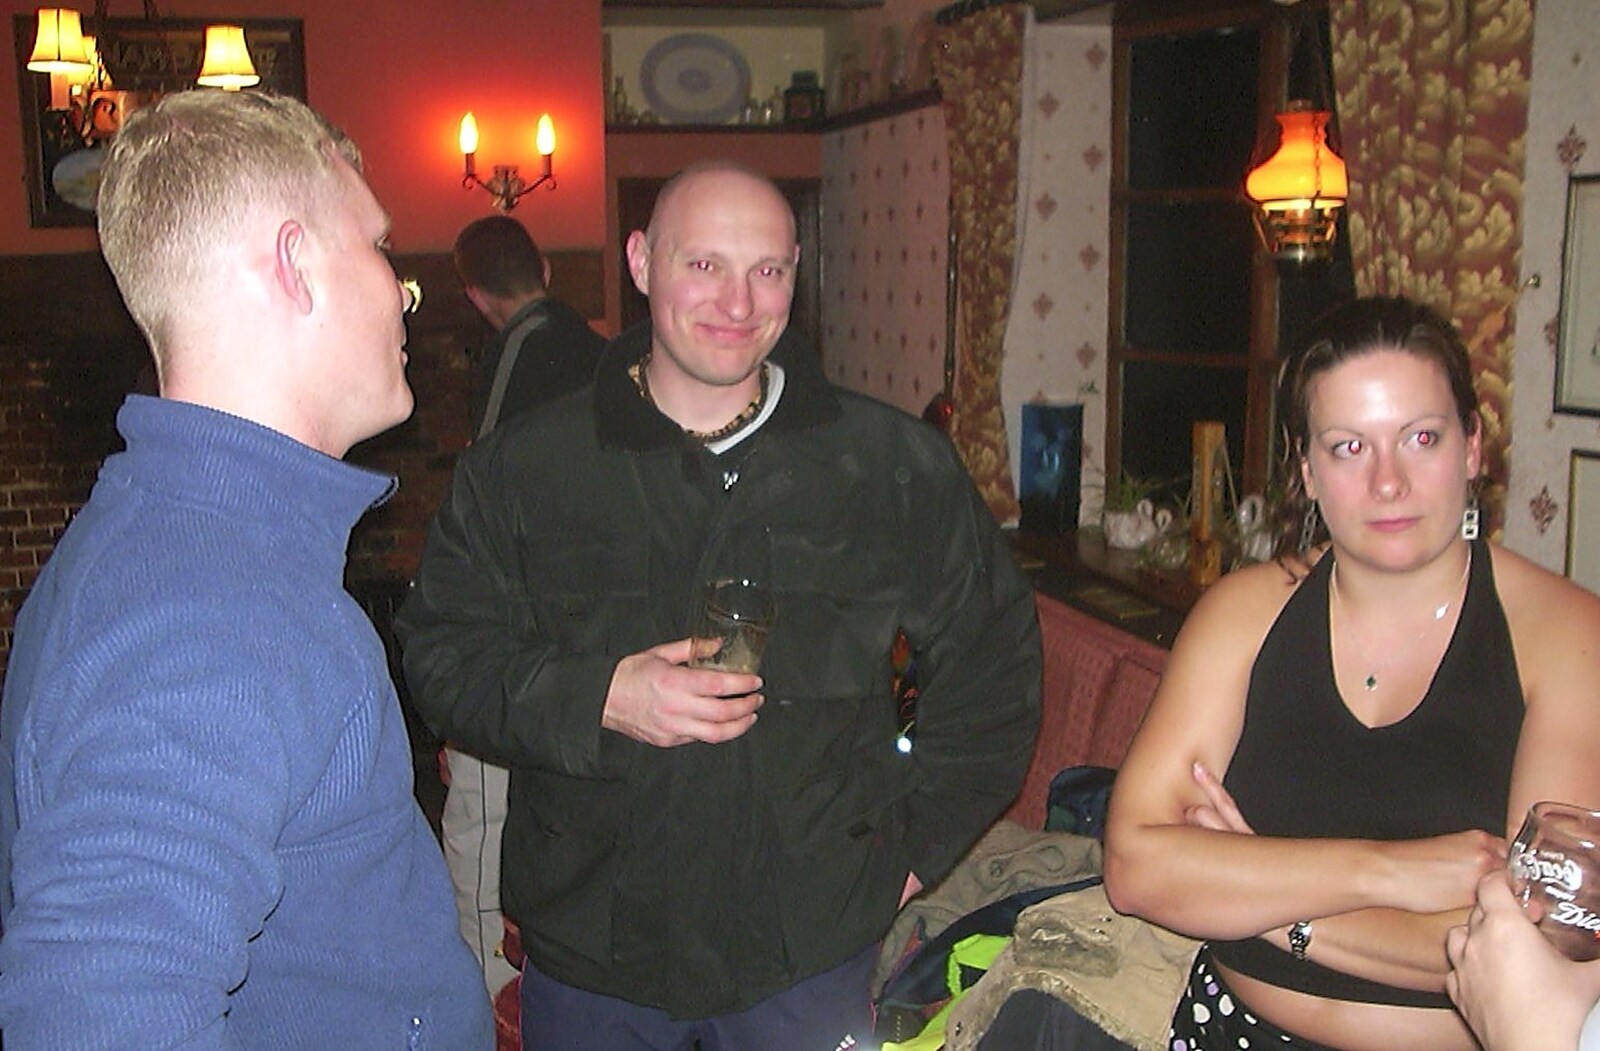 Wednesday and Thursday: The BSCC Season Opens, and Stuff Happens, Suffolk - 9th April 2004: Gov looks over